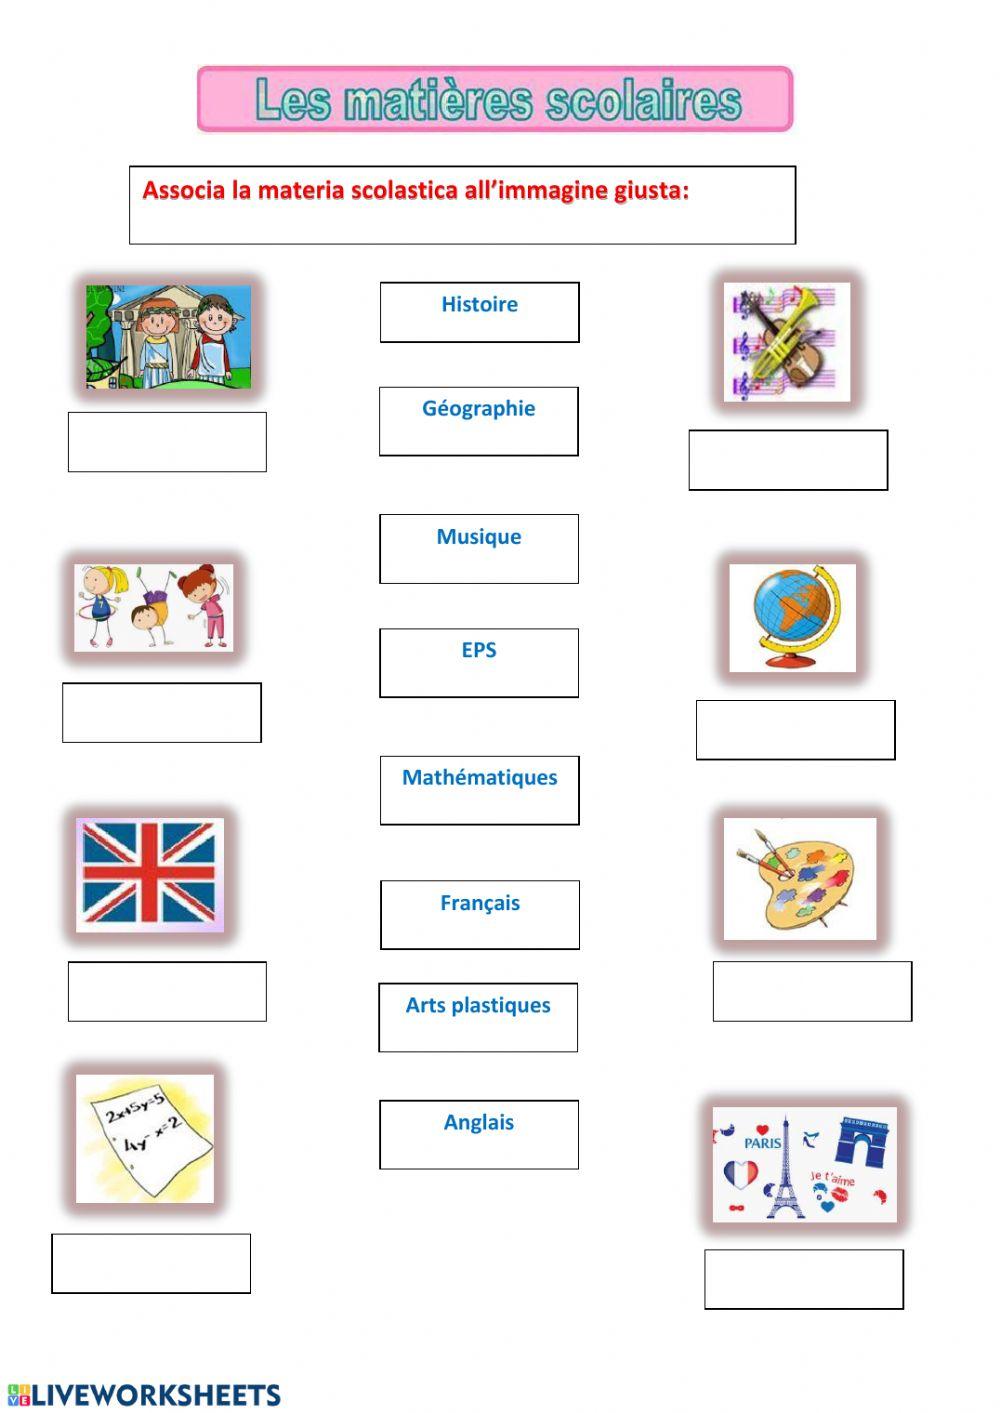 Associa Le materie scolastiche online exercise for | Live Worksheets